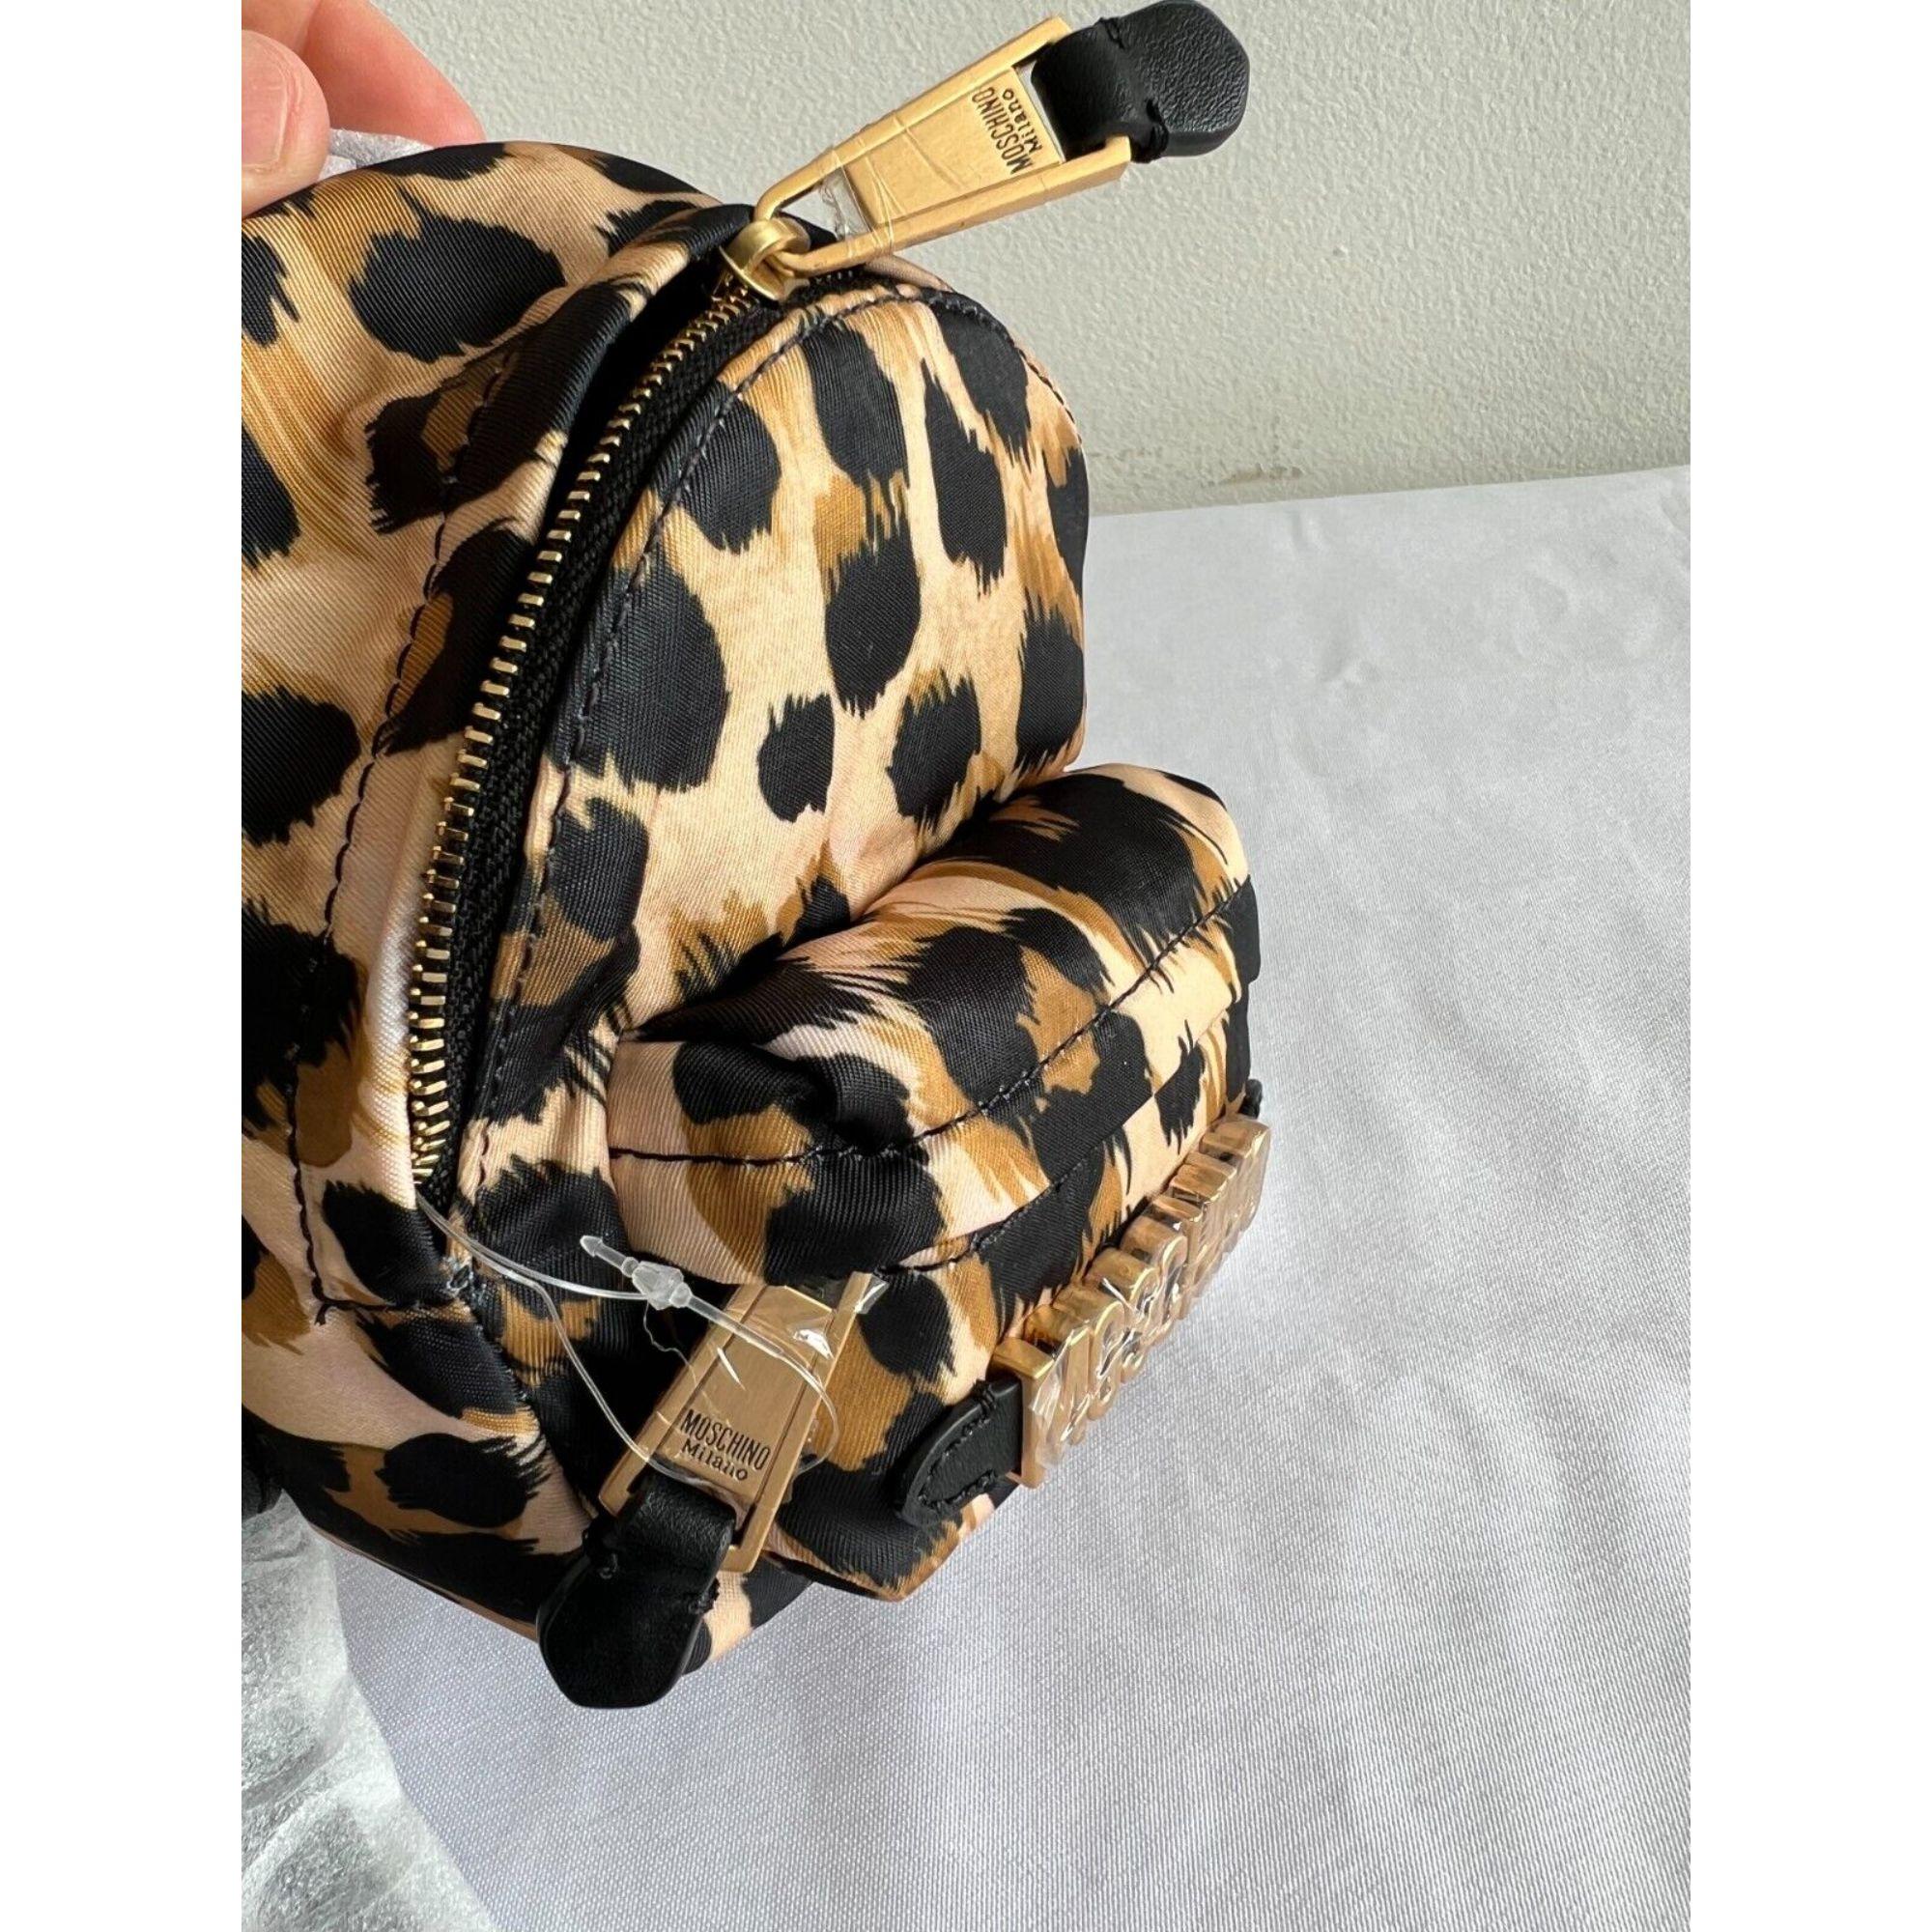 AW21 Moschino Couture Leopard Print Shoulder Bag Mini Backpack by Jeremy Scott In New Condition For Sale In Matthews, NC